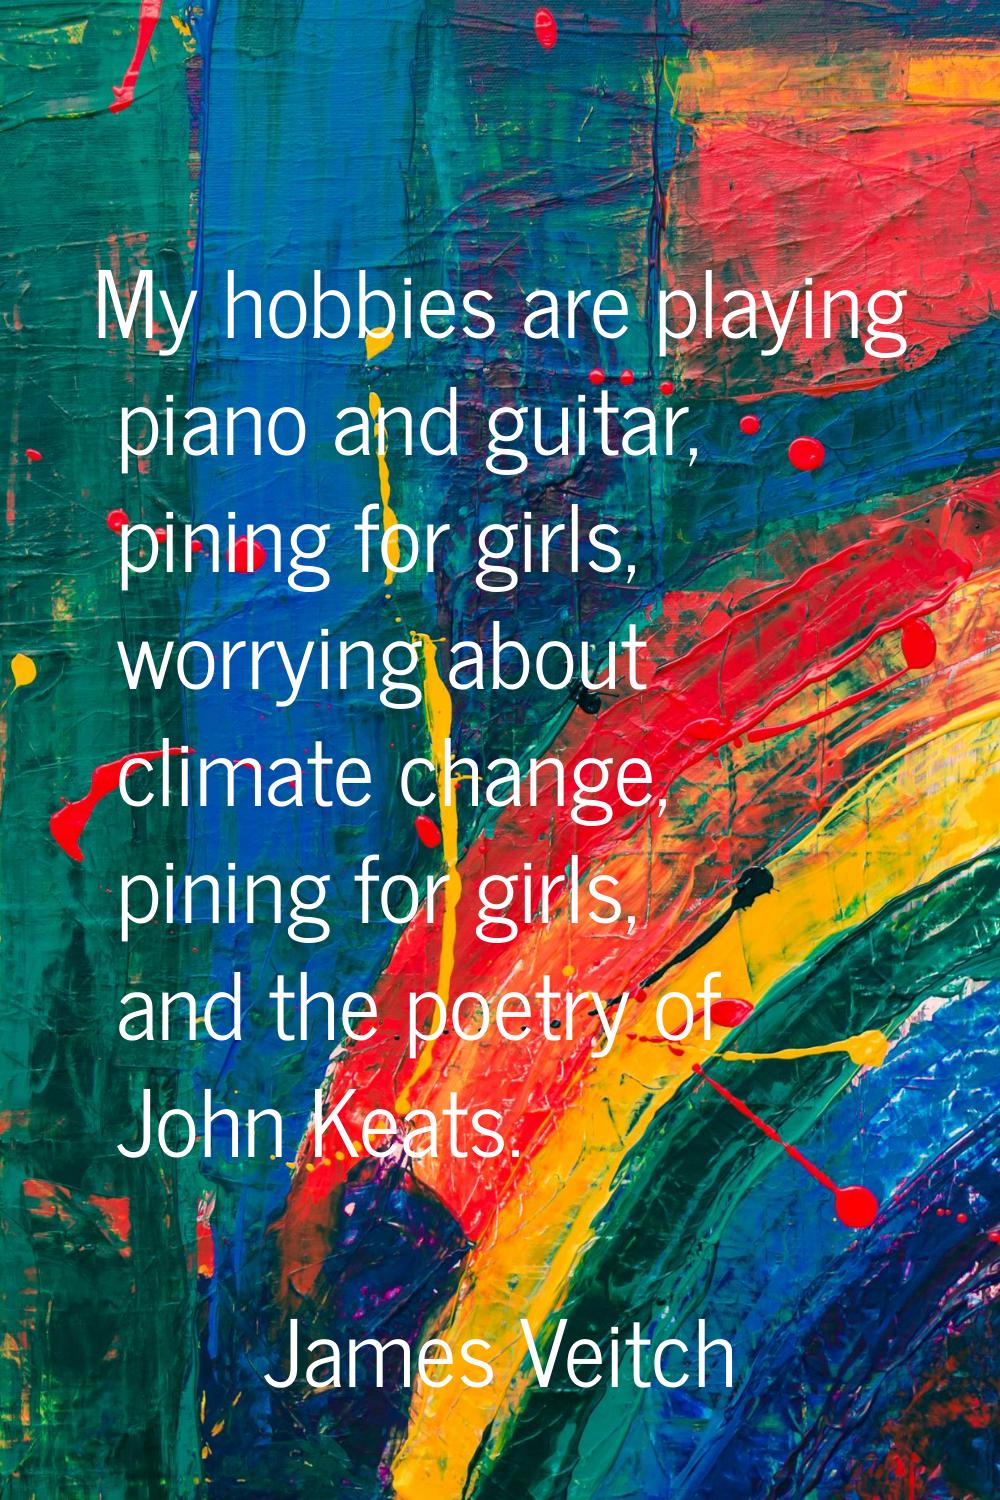 My hobbies are playing piano and guitar, pining for girls, worrying about climate change, pining fo